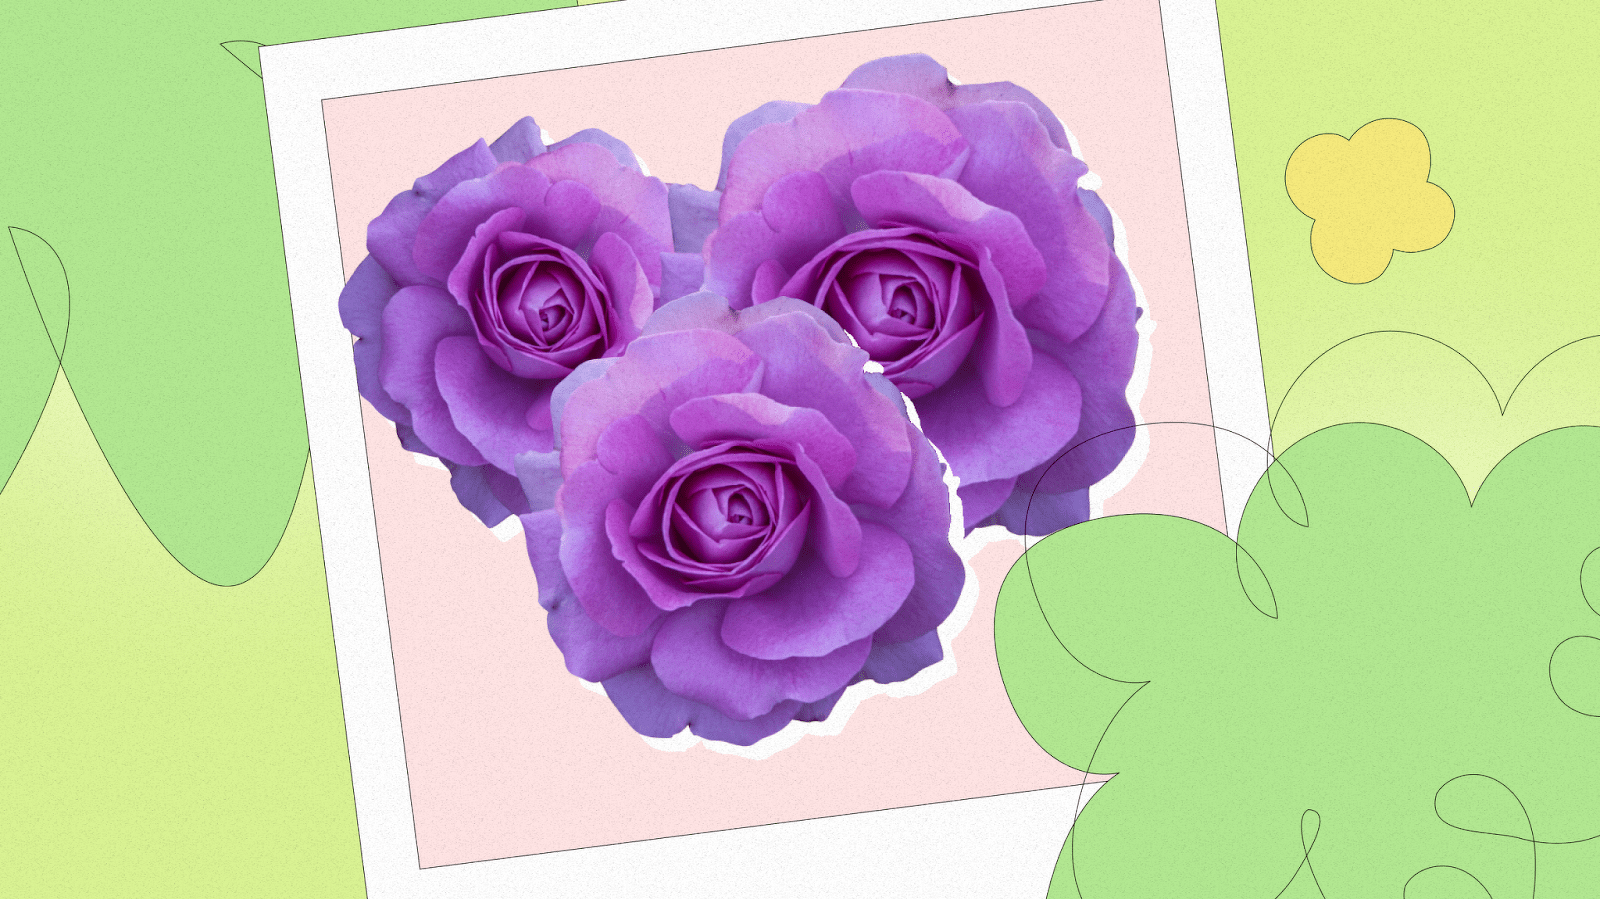 What do purple roses mean?